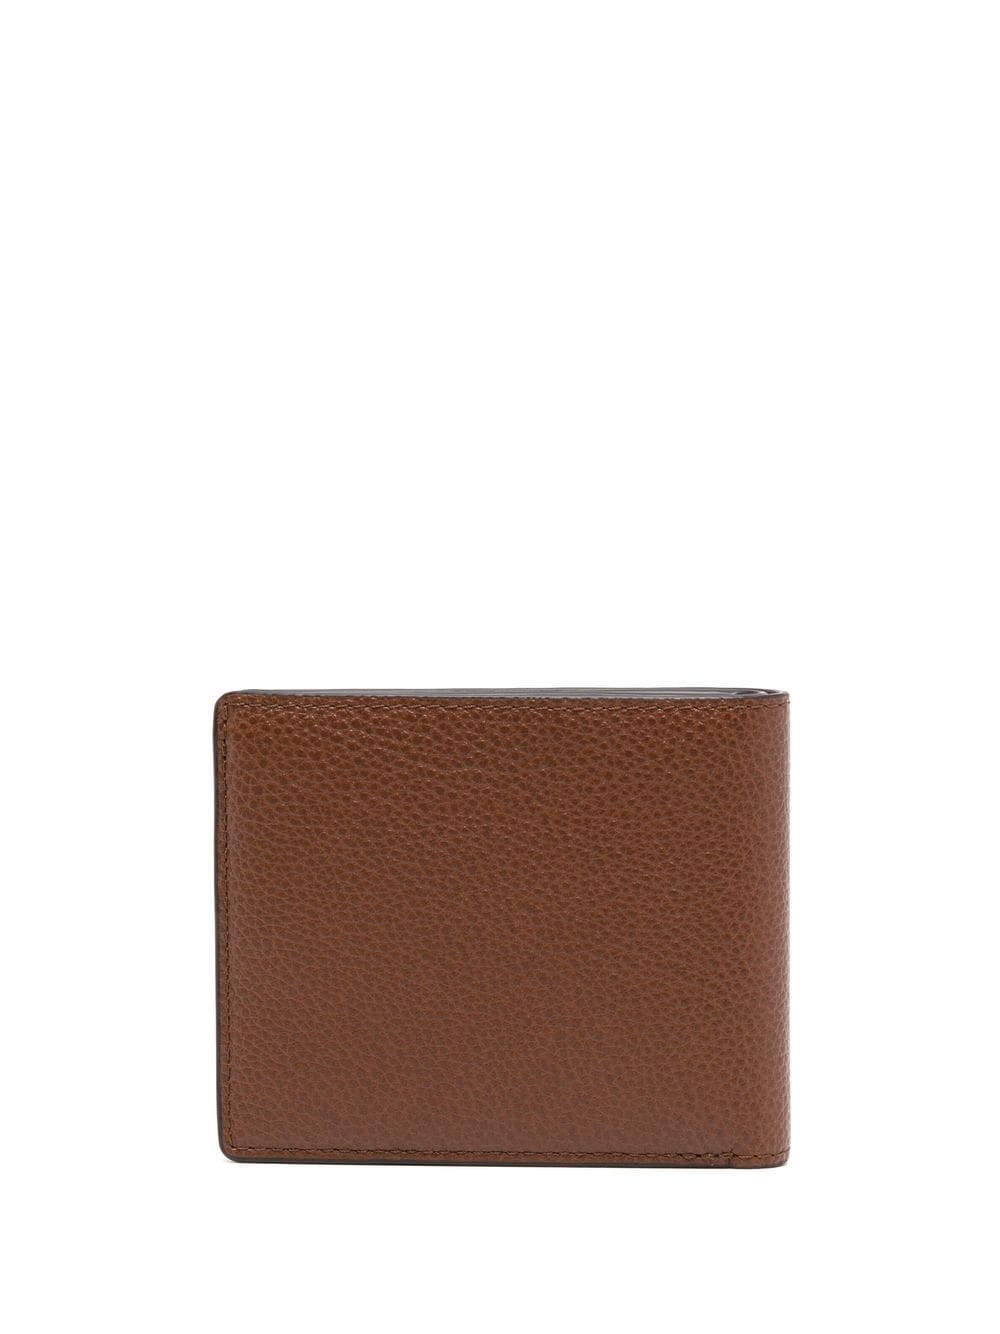 Mulberry 8 Card Wallet Two Tone Scg Brown 3